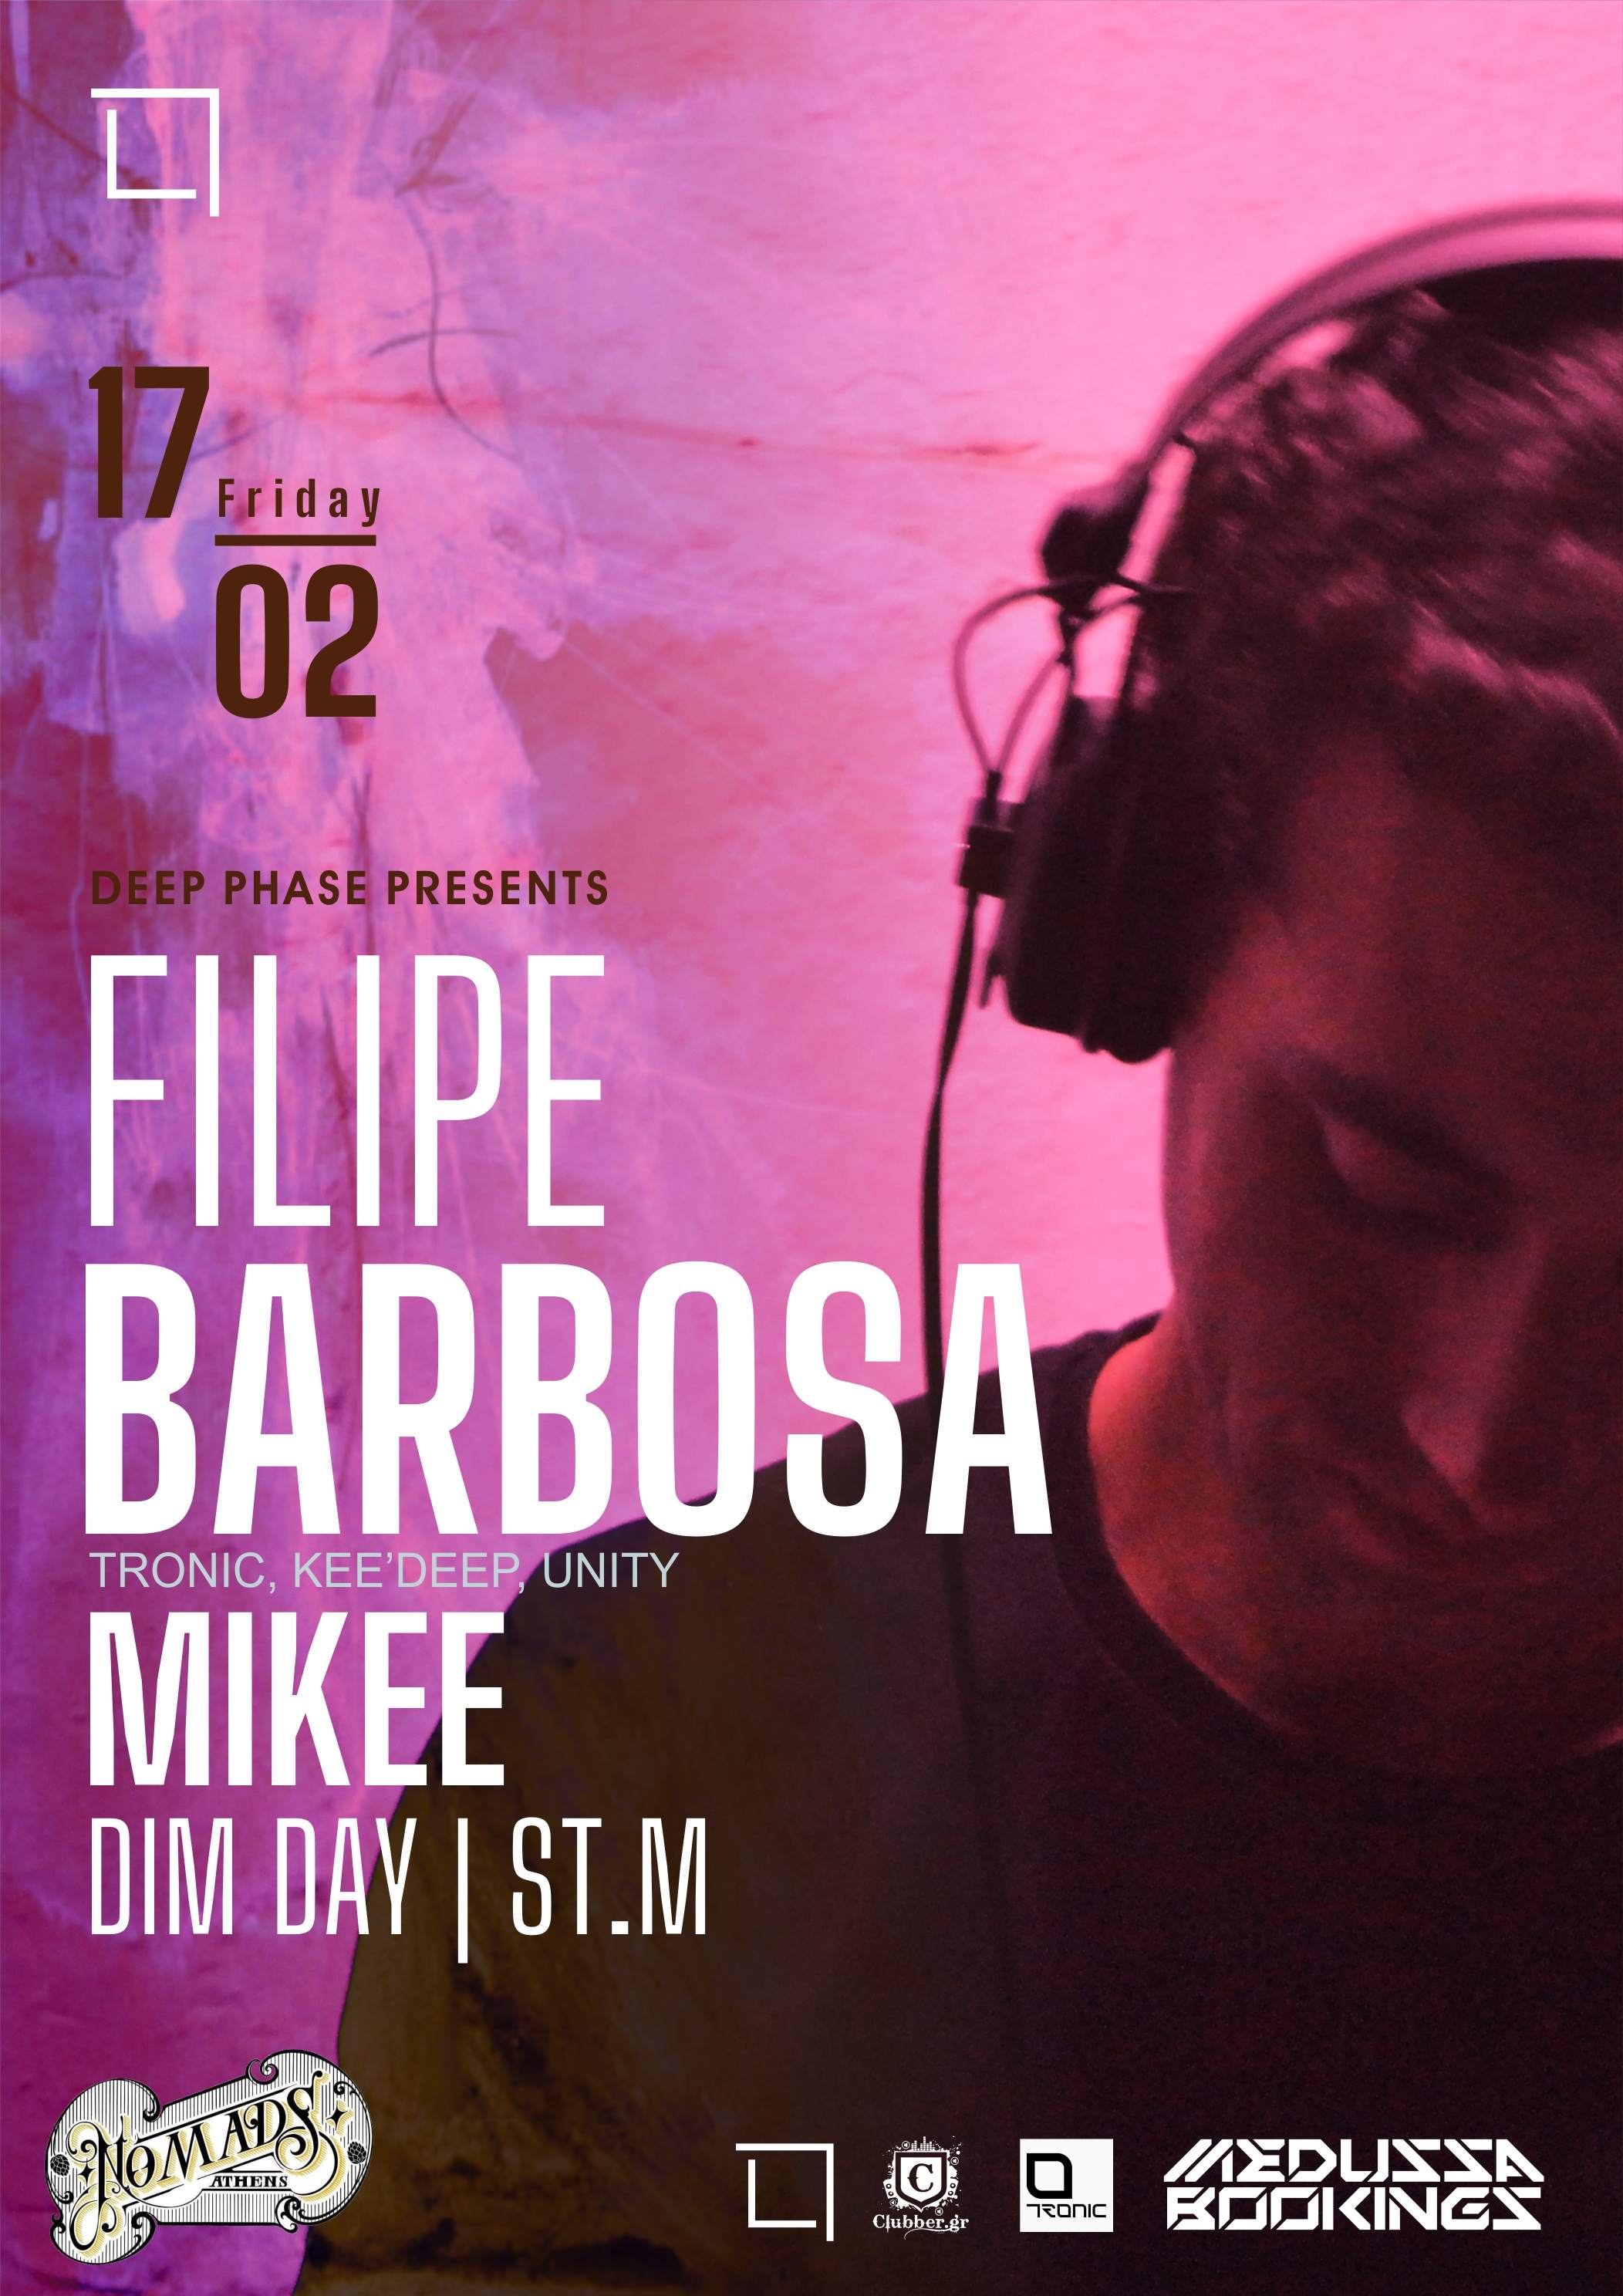 DEEP PHASE with Filipe Barbosa - MIKEE - DIM DAY - ST.M at NOMADS - Página trasera